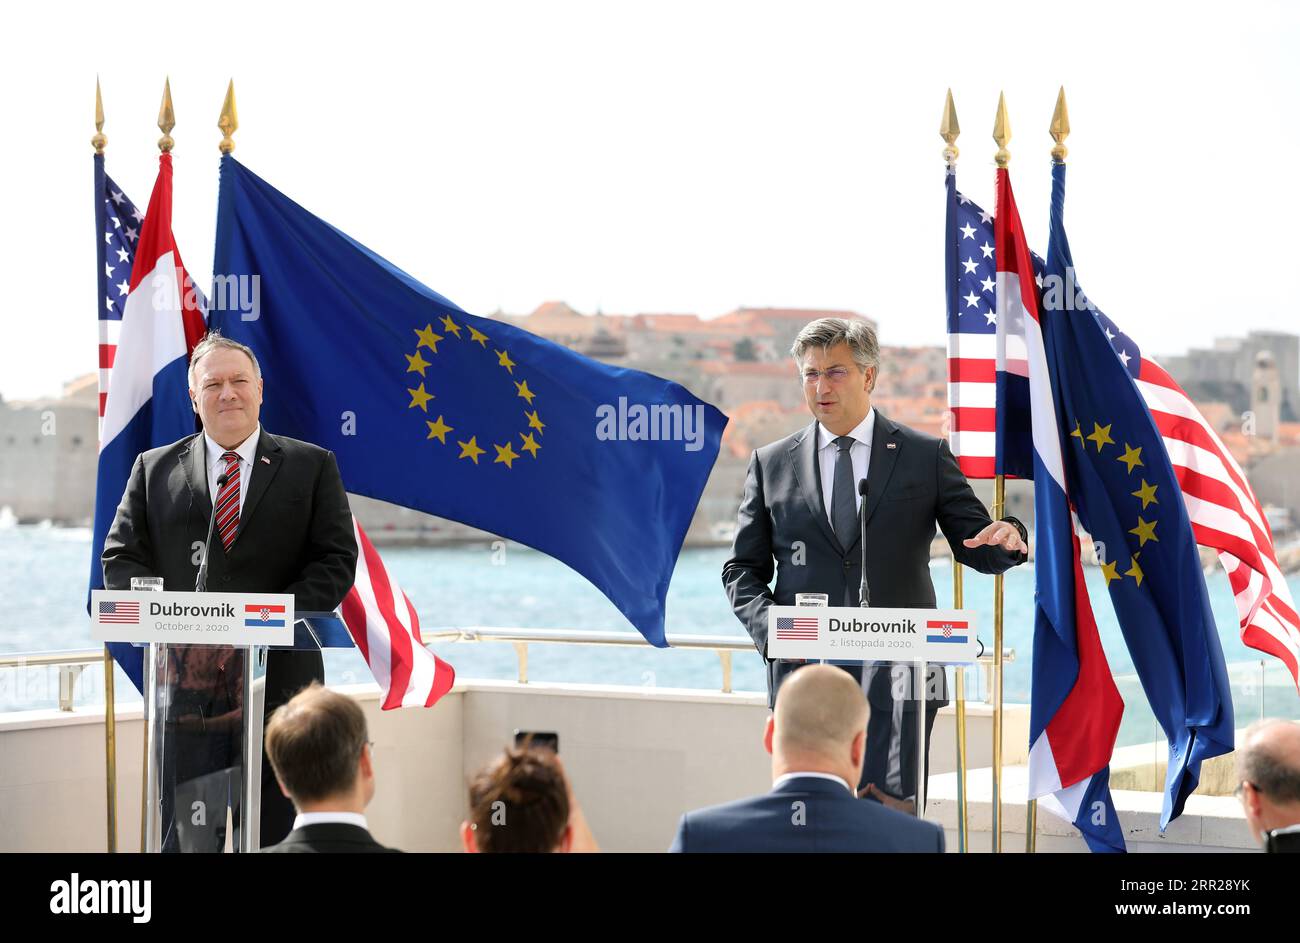 201006 -- ATHENS, Oct. 6, 2020 -- Croatian Prime Minister Andrej Plenkovic R and visiting U.S. Secretary of State Mike Pompeo attend a joint press conference after their meeting in Dubrovnik, Croatia, Oct. 2, 2020. /Pixsell via Xinhua Xinhua Headlines: Pompeo s China-smearing rhetoric not well received in Europe GrgoxJelavic PUBLICATIONxNOTxINxCHN Stock Photo